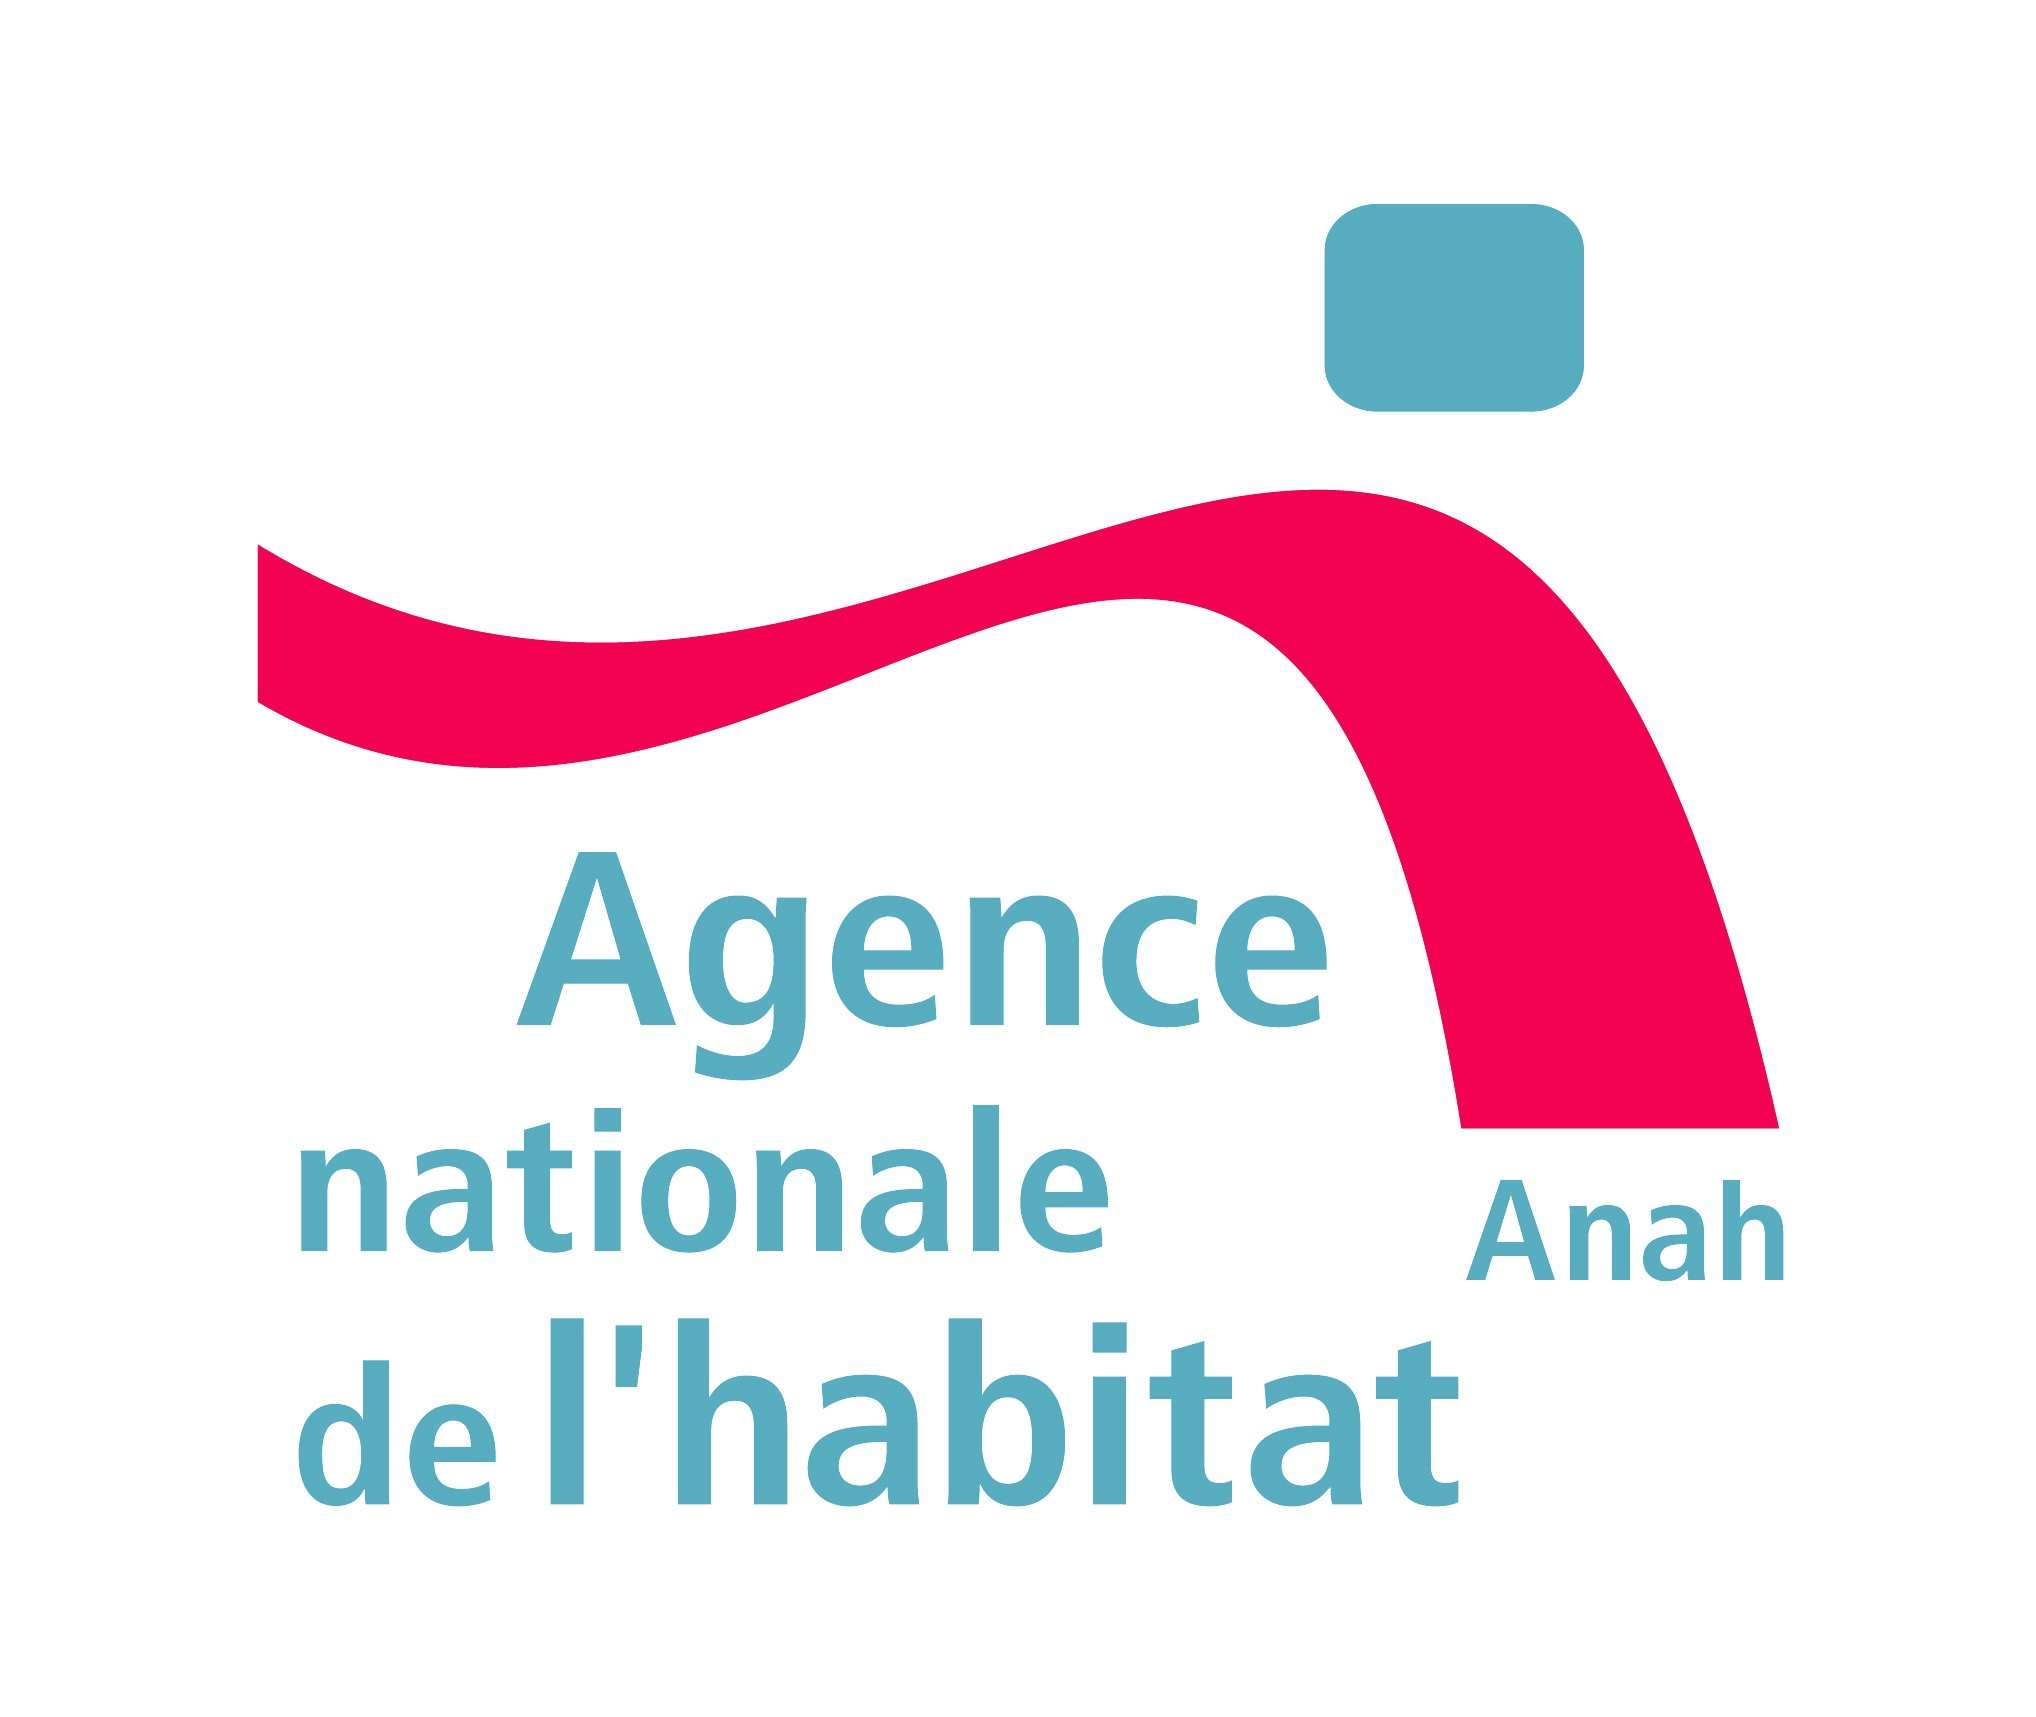 ANAH - Consulter le site www.anah.gouv.fr